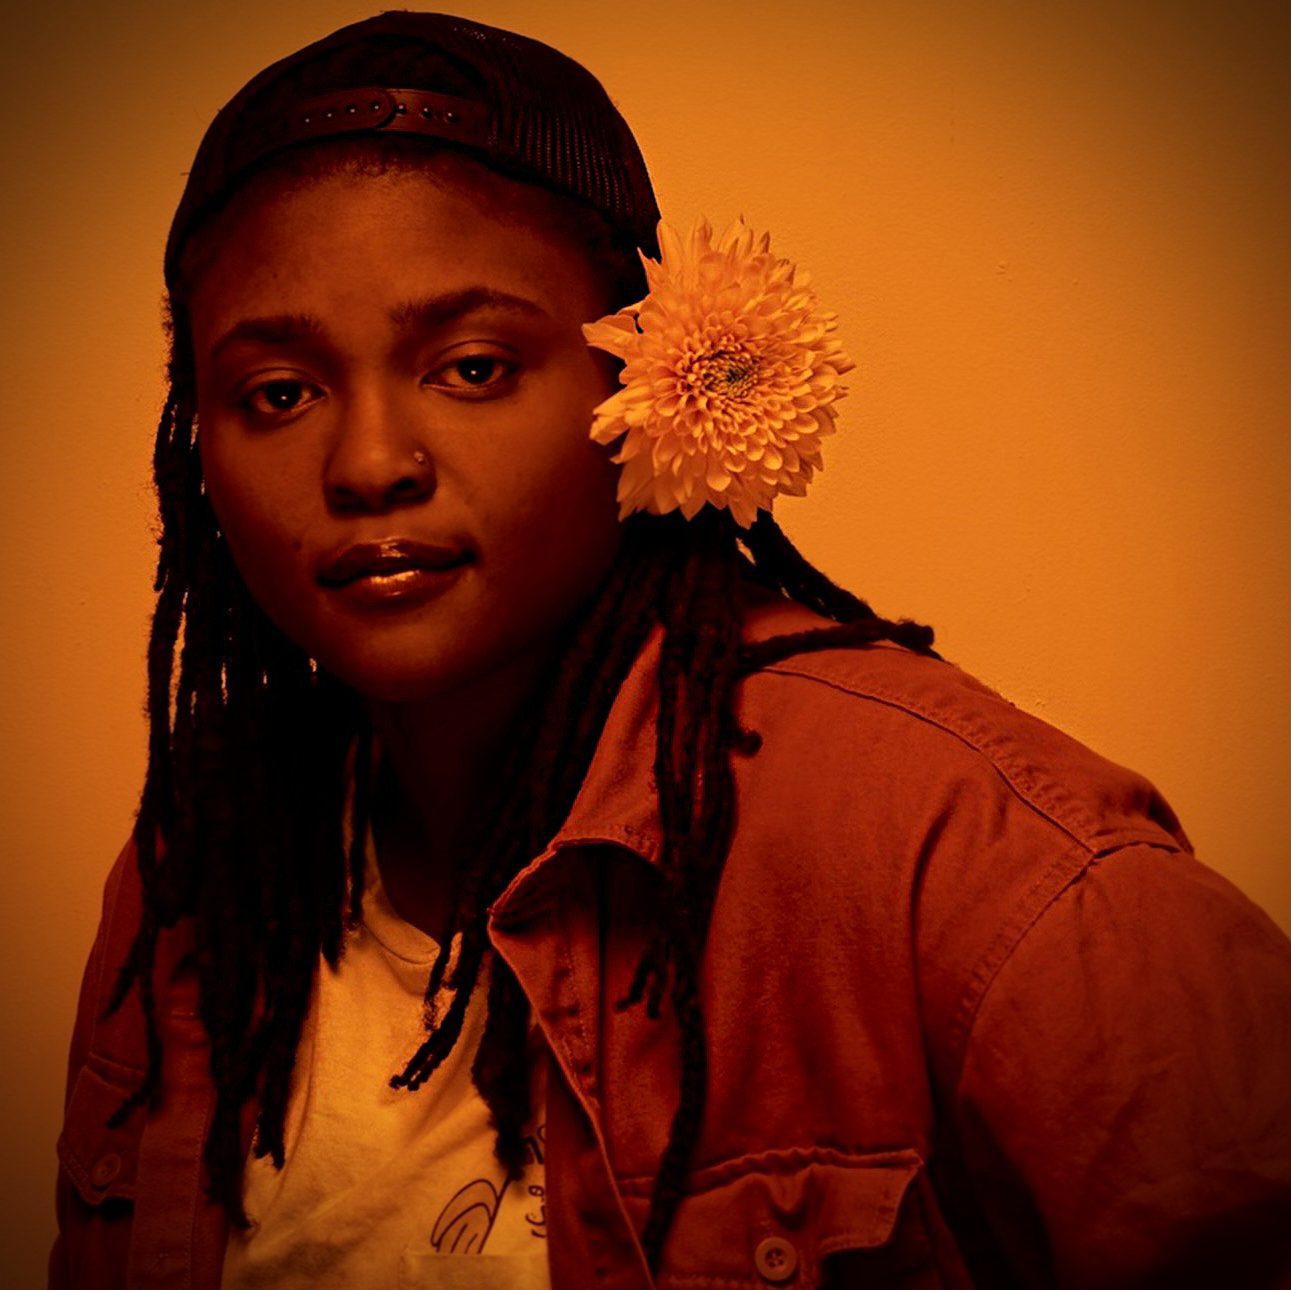 Joy Oladokun’s new song We're all gonna die released via 360 MAGAZINE.